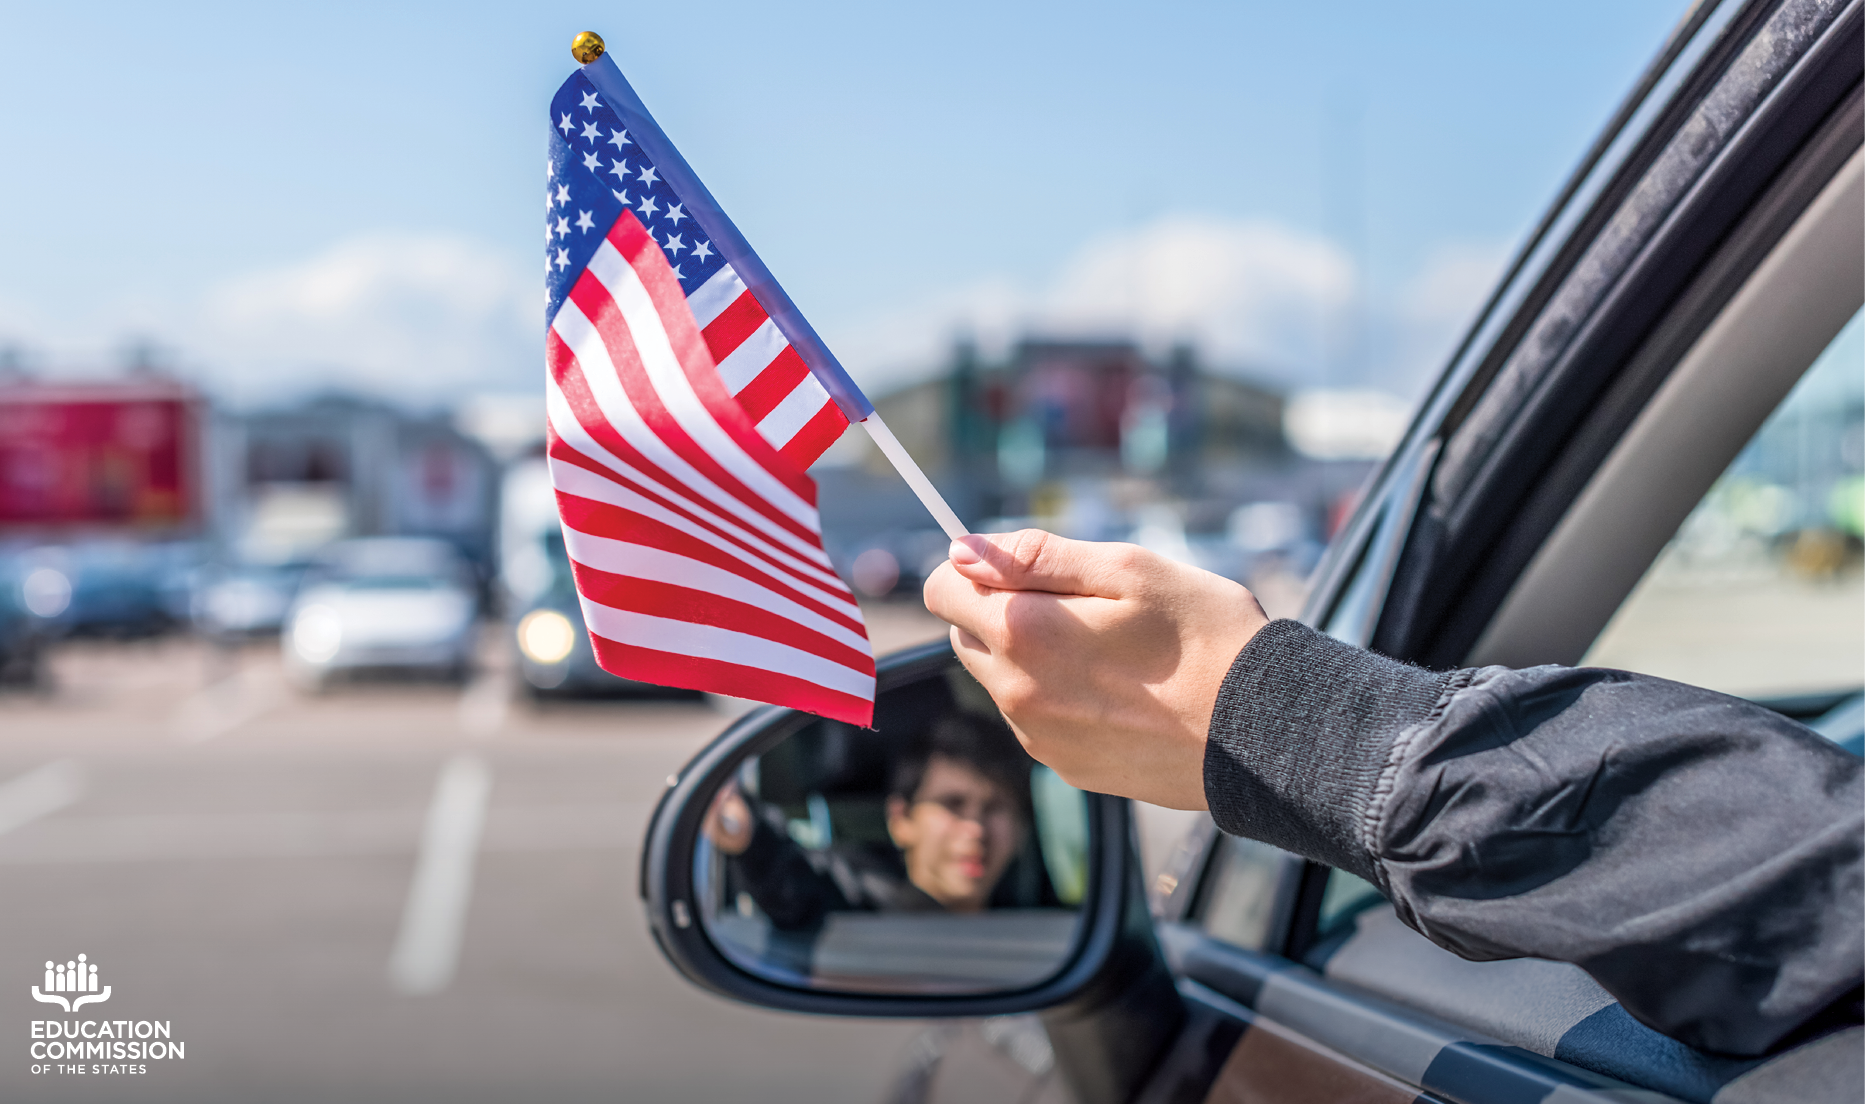 A child holds a small American flag out of a car window. The child is smiling in the reflection of the side view mirror.